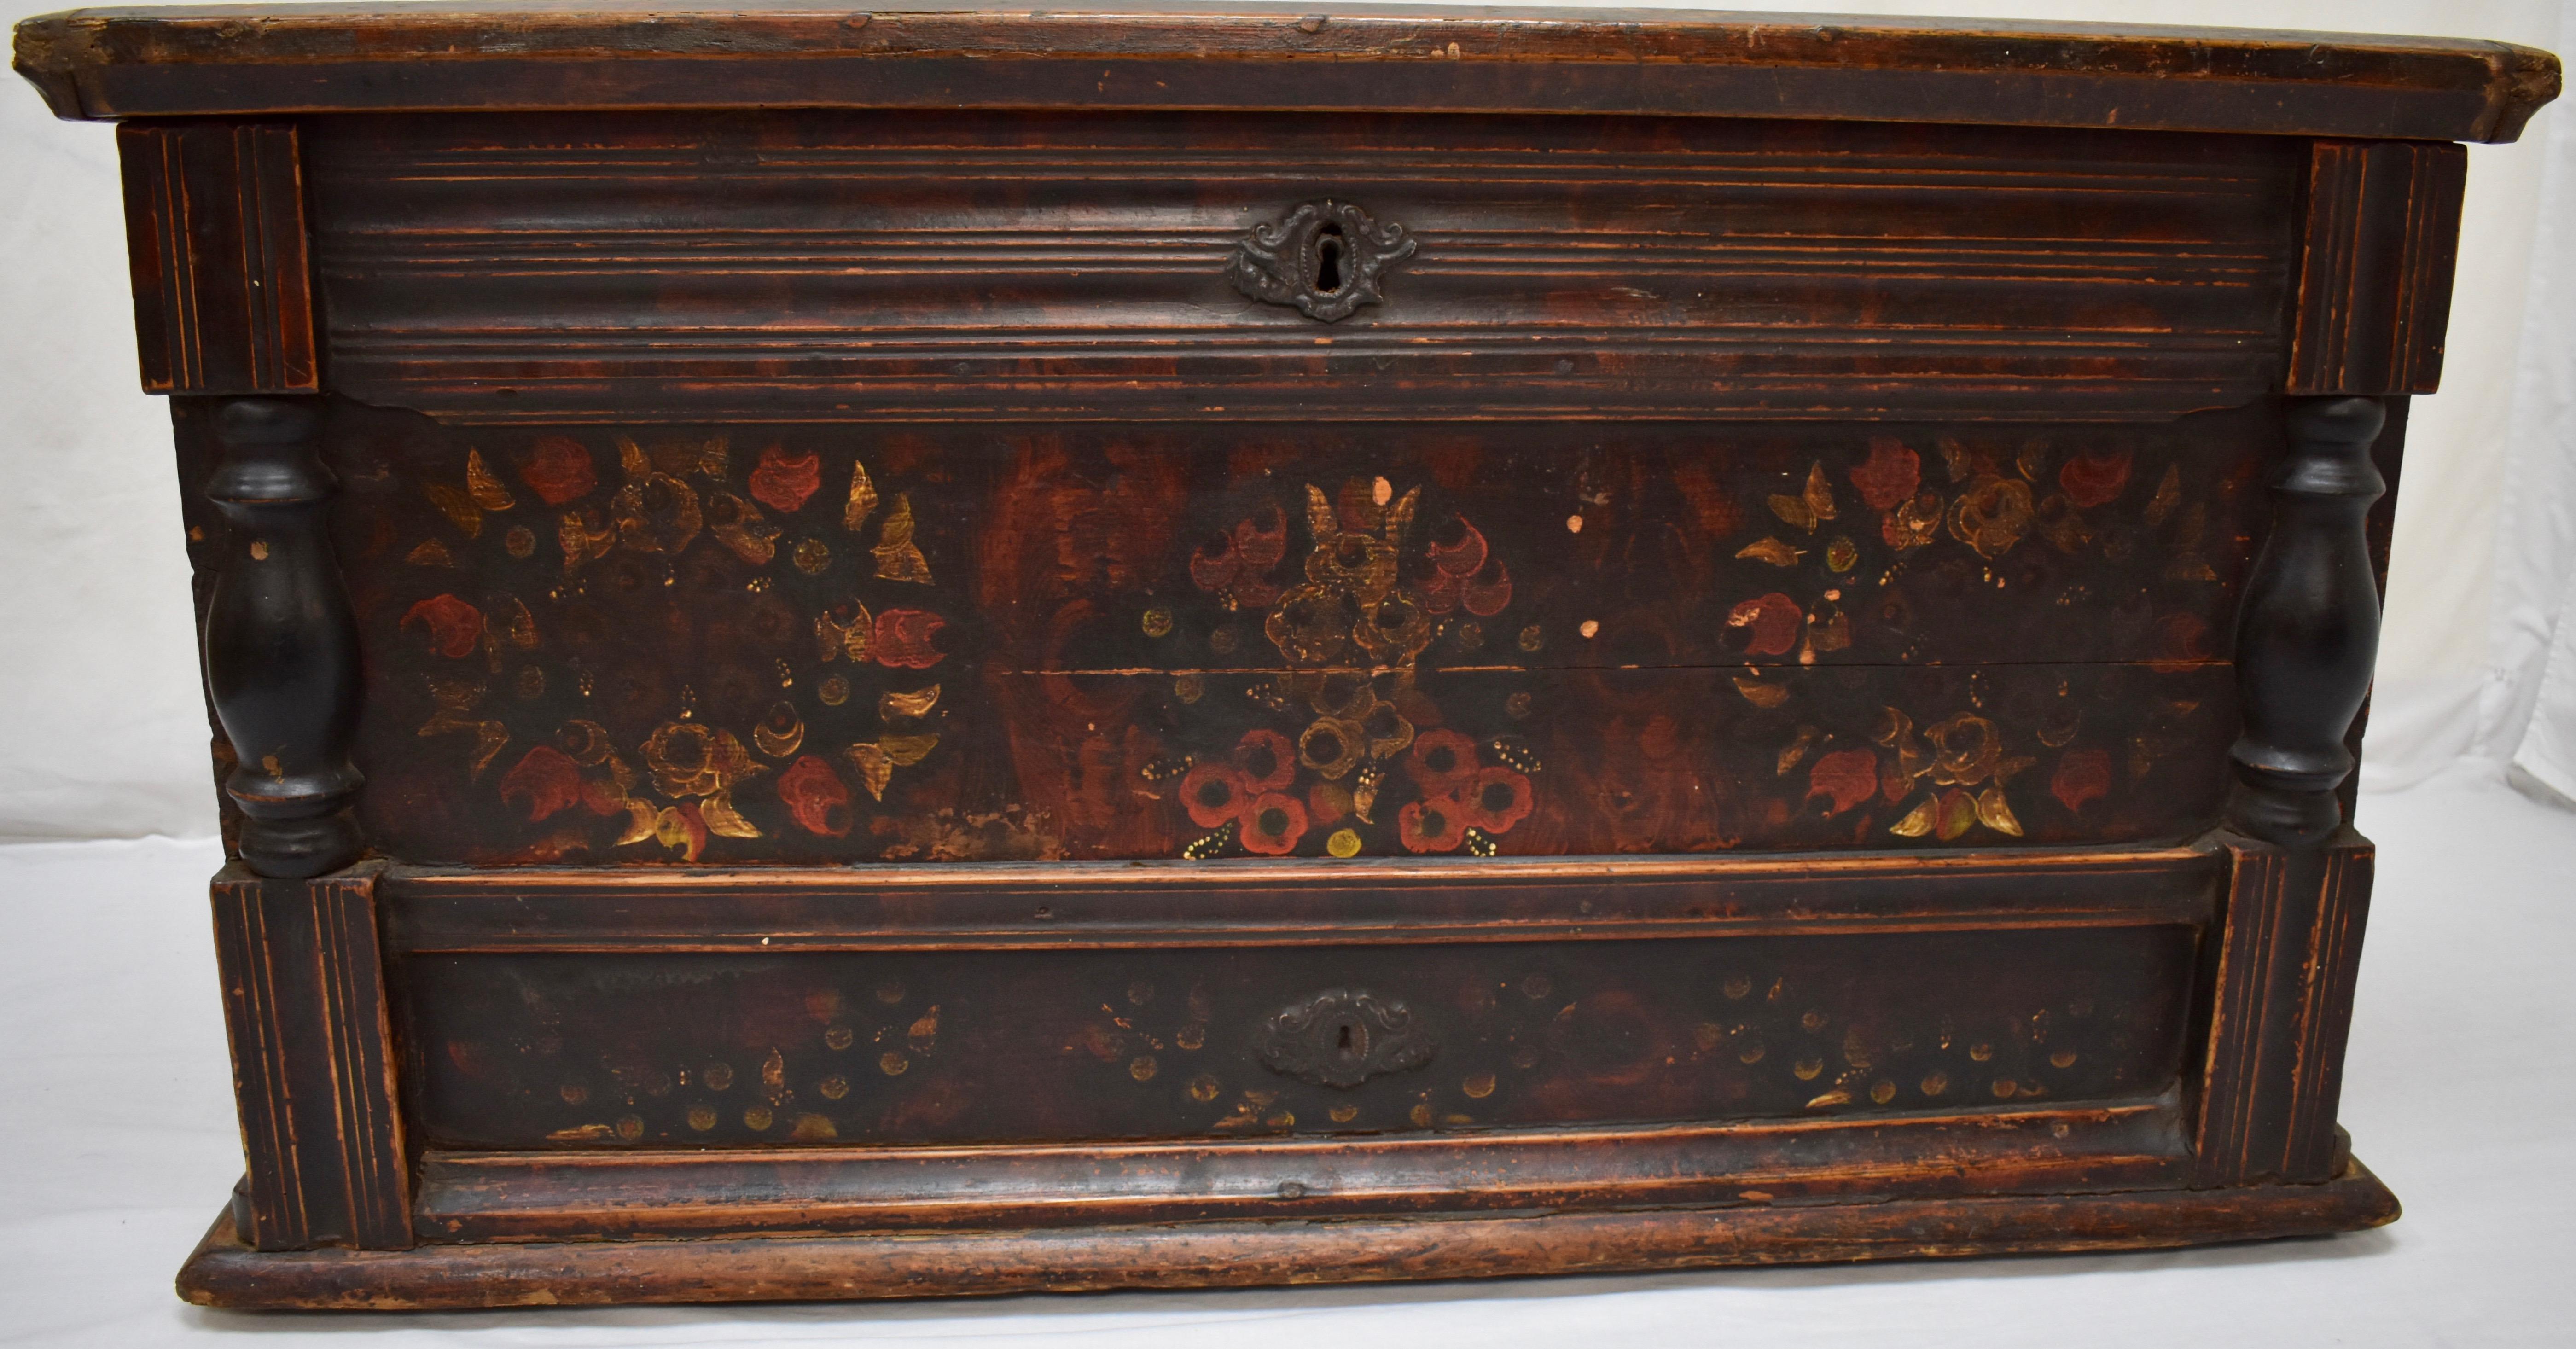 19th Century Pine Trunk or Blanket Chest in Original Paint